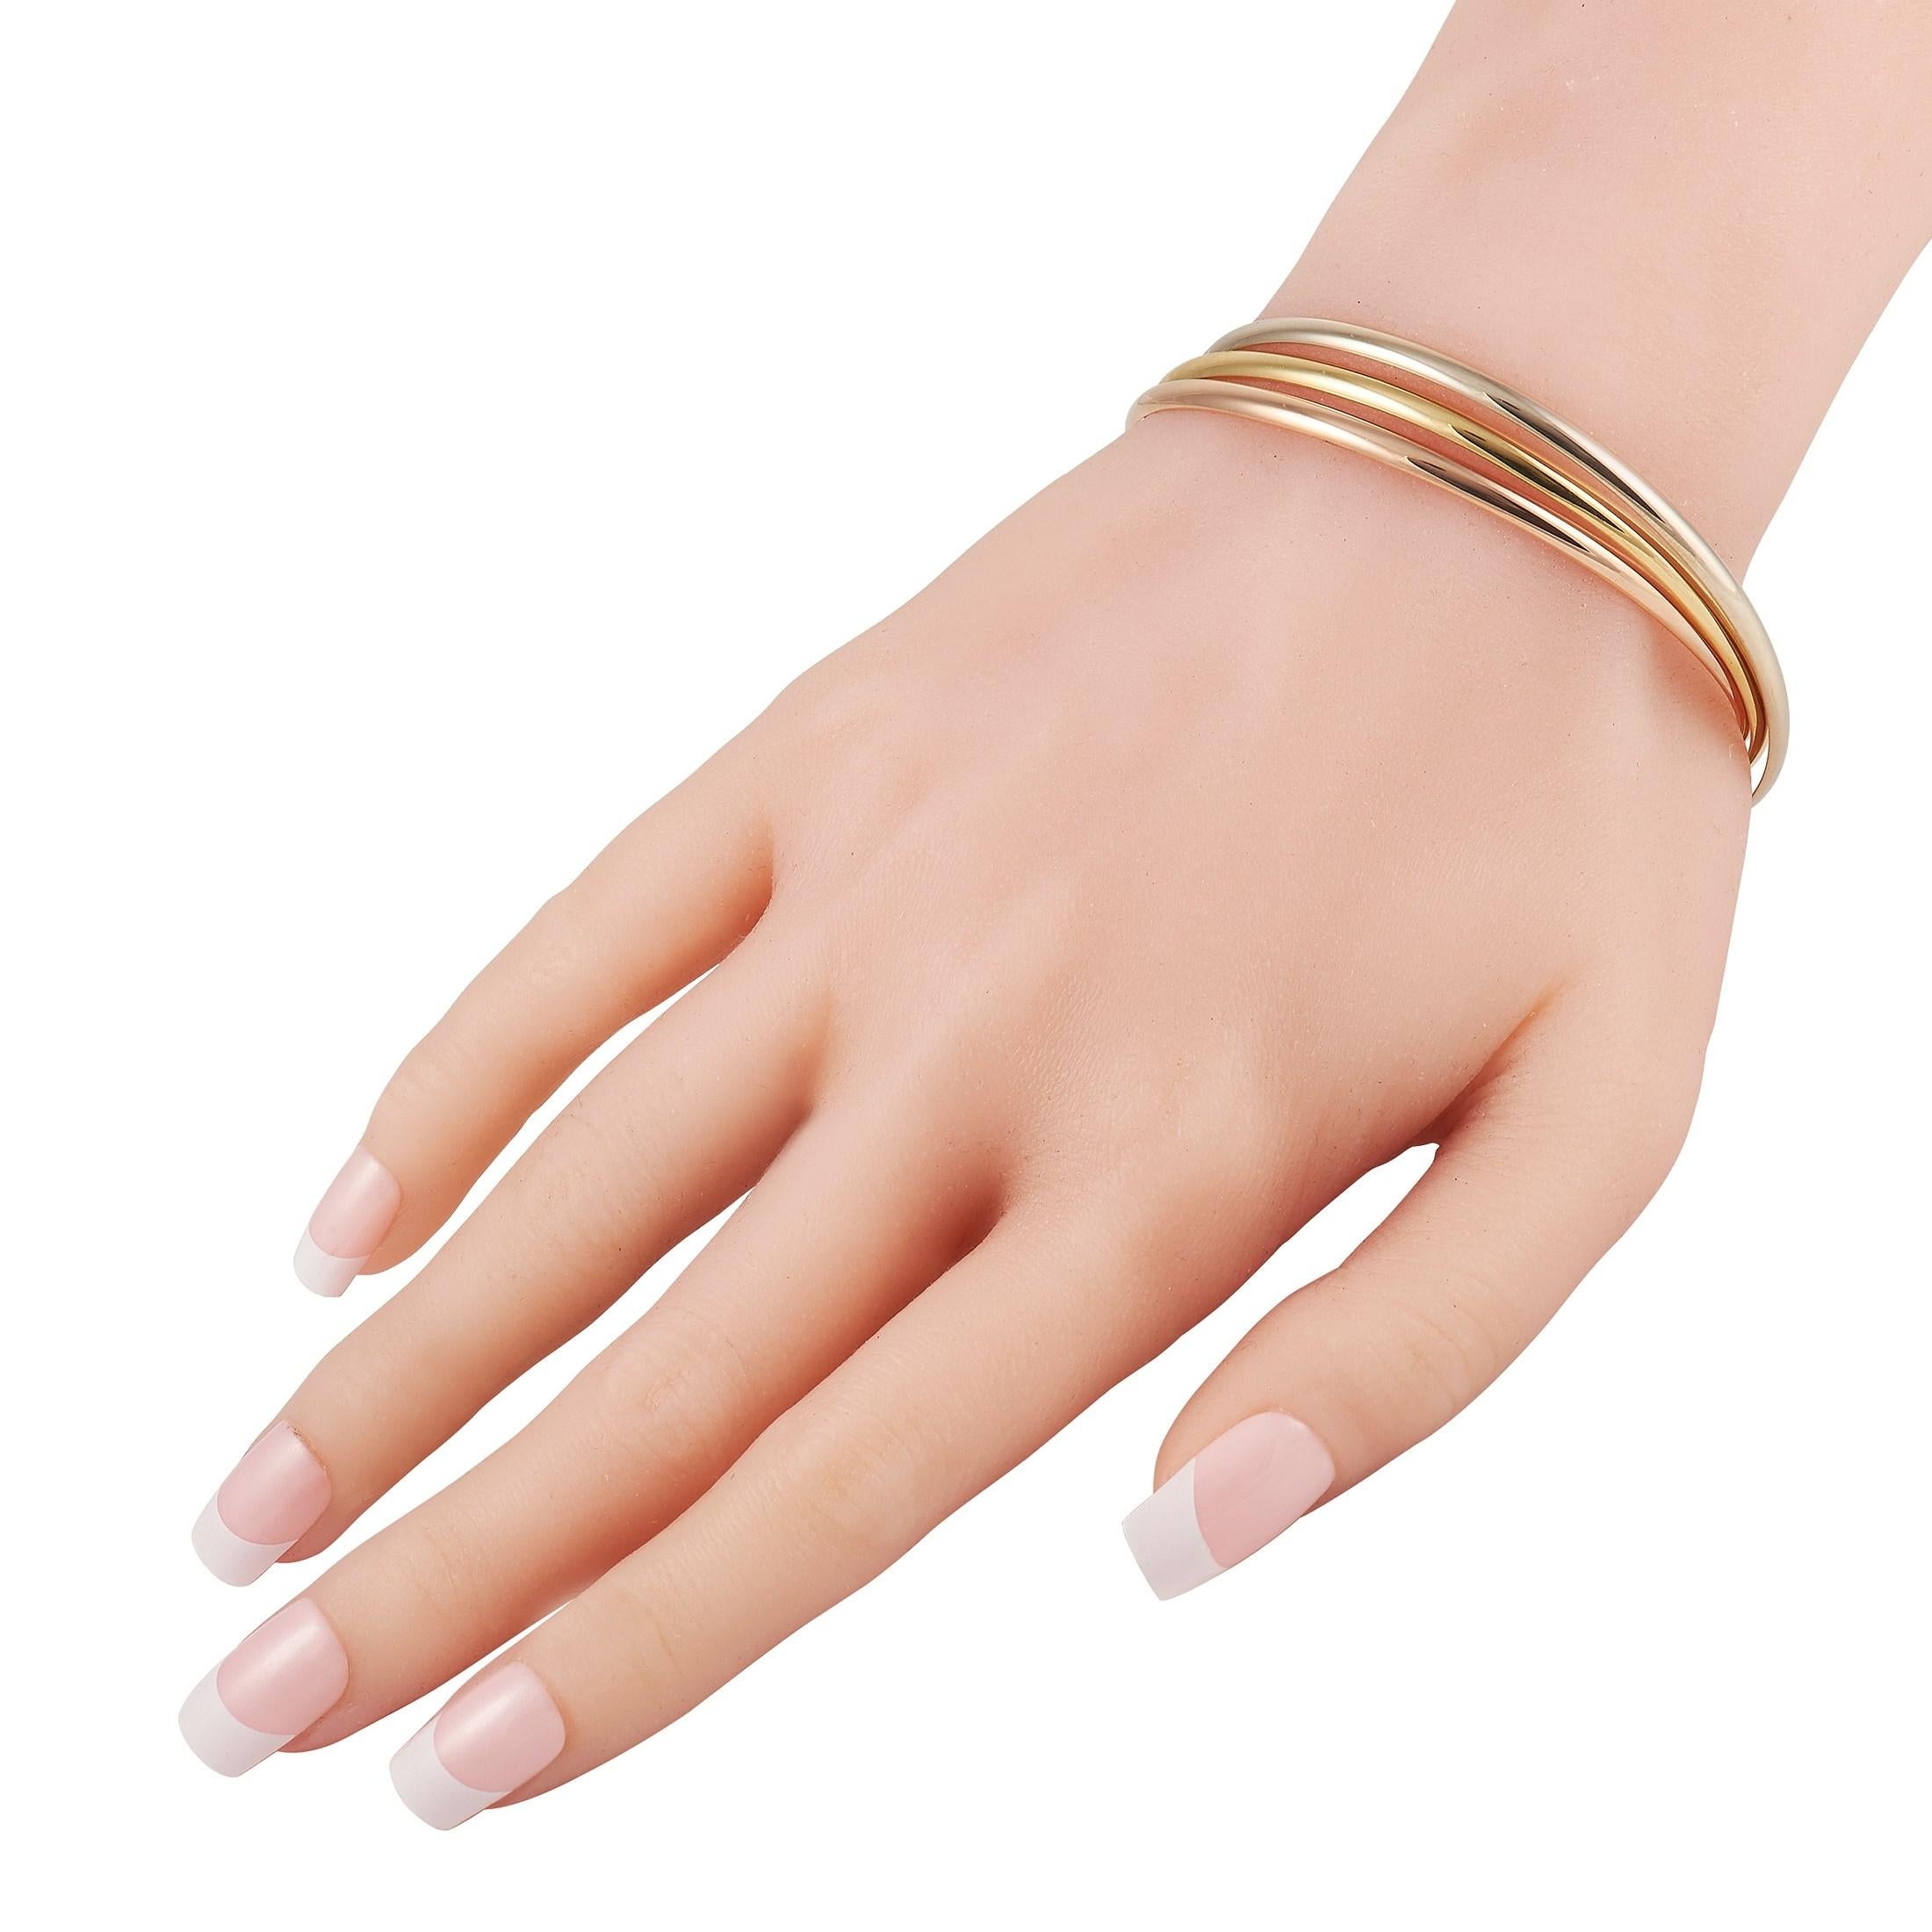 Delivering simple luxury is this Cartier Trinity Bangle Bracelet. It features a trio of slender rigid bangles in 18-karat yellow gold, white gold, and rose gold. With its uncluttered look, minimalist aesthetic, and eternal style, this piece of